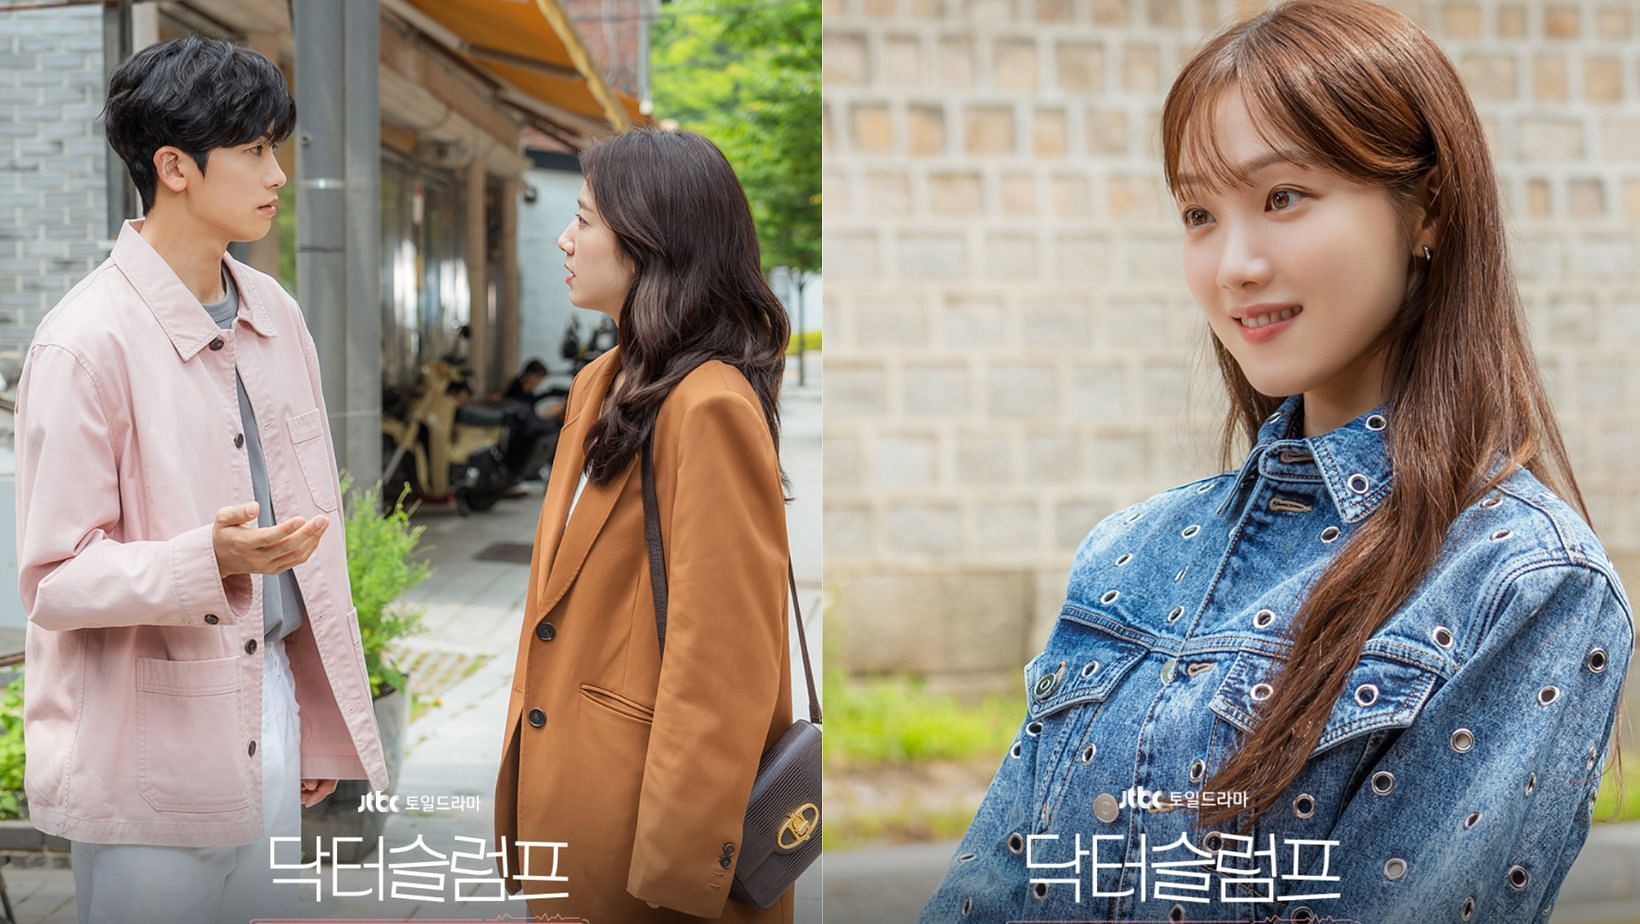 Lee Sung-kyung makes a special appearance in Park Hyung-sik &amp; Park Shin-hye starring drama 